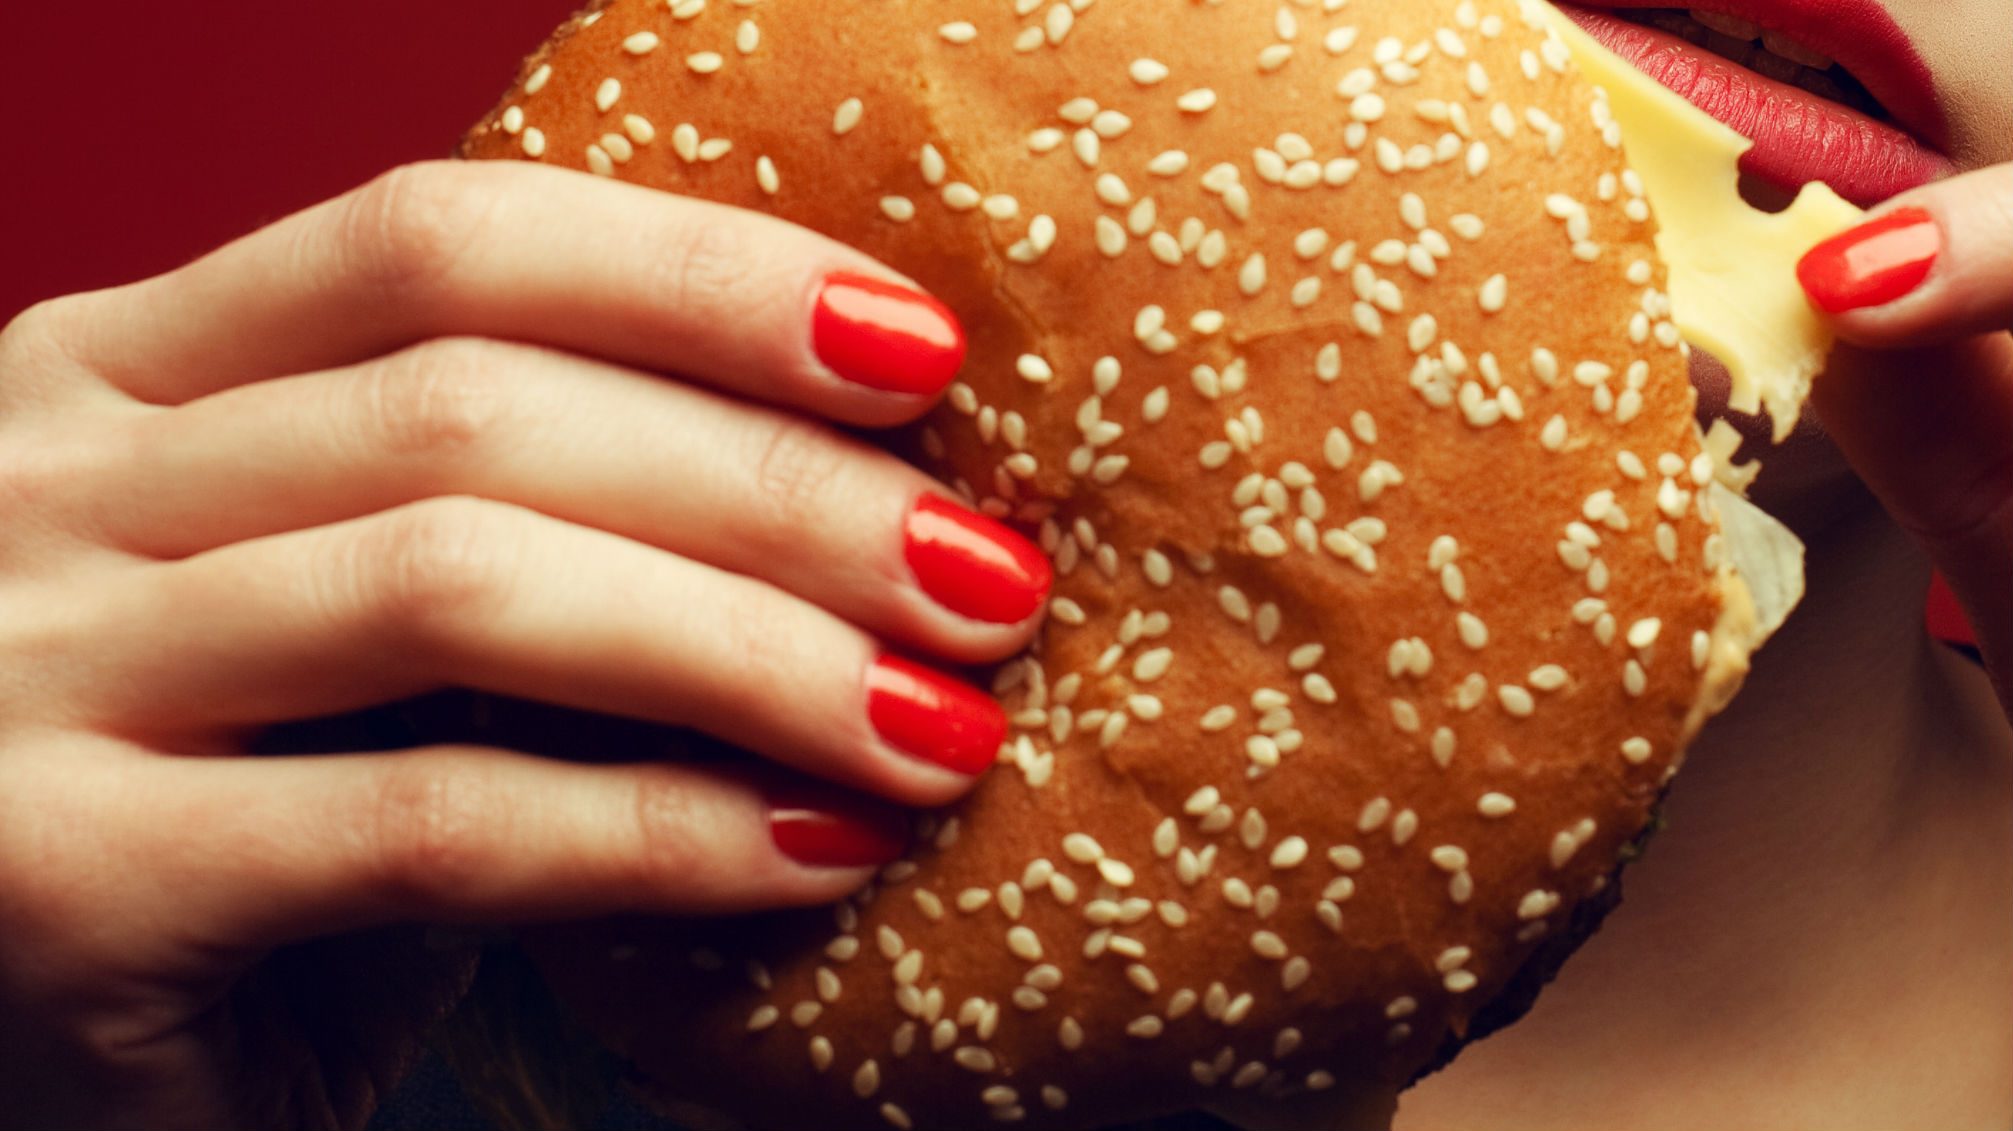 cheat meals good, a burger with manicured nails